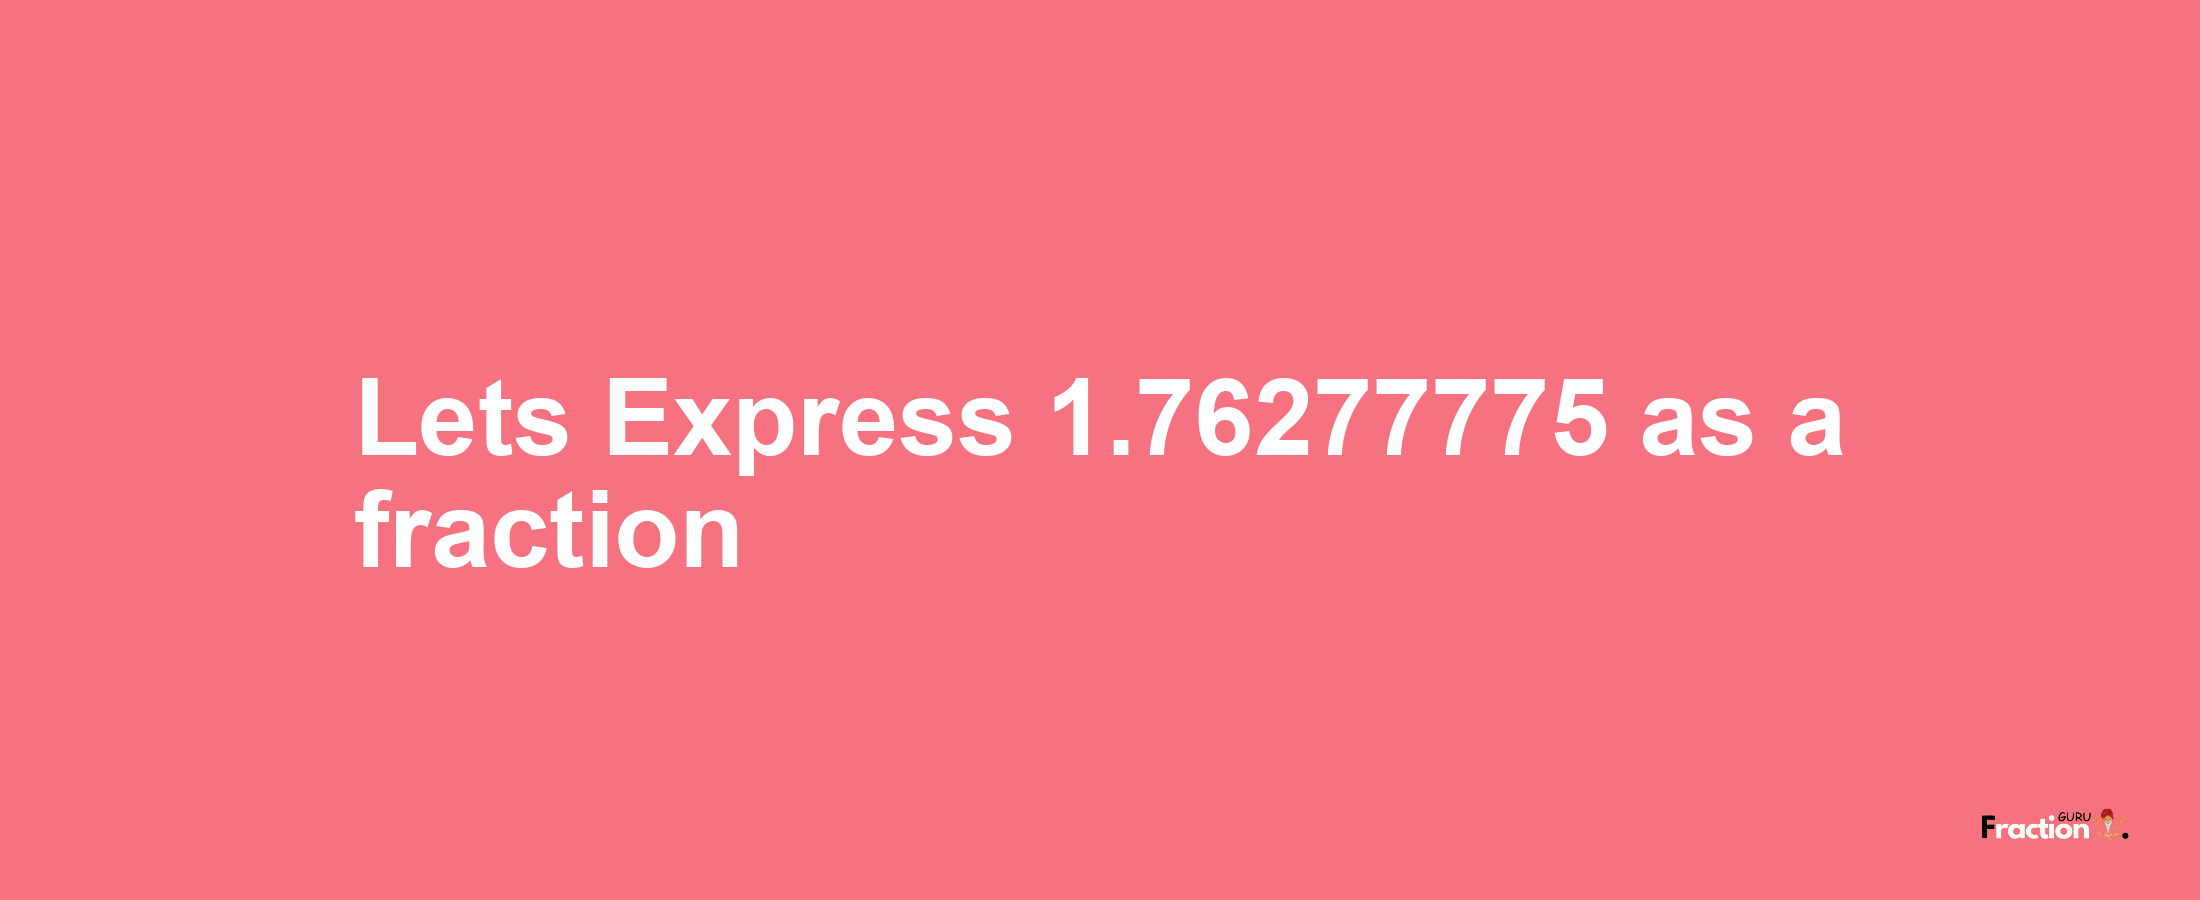 Lets Express 1.76277775 as afraction